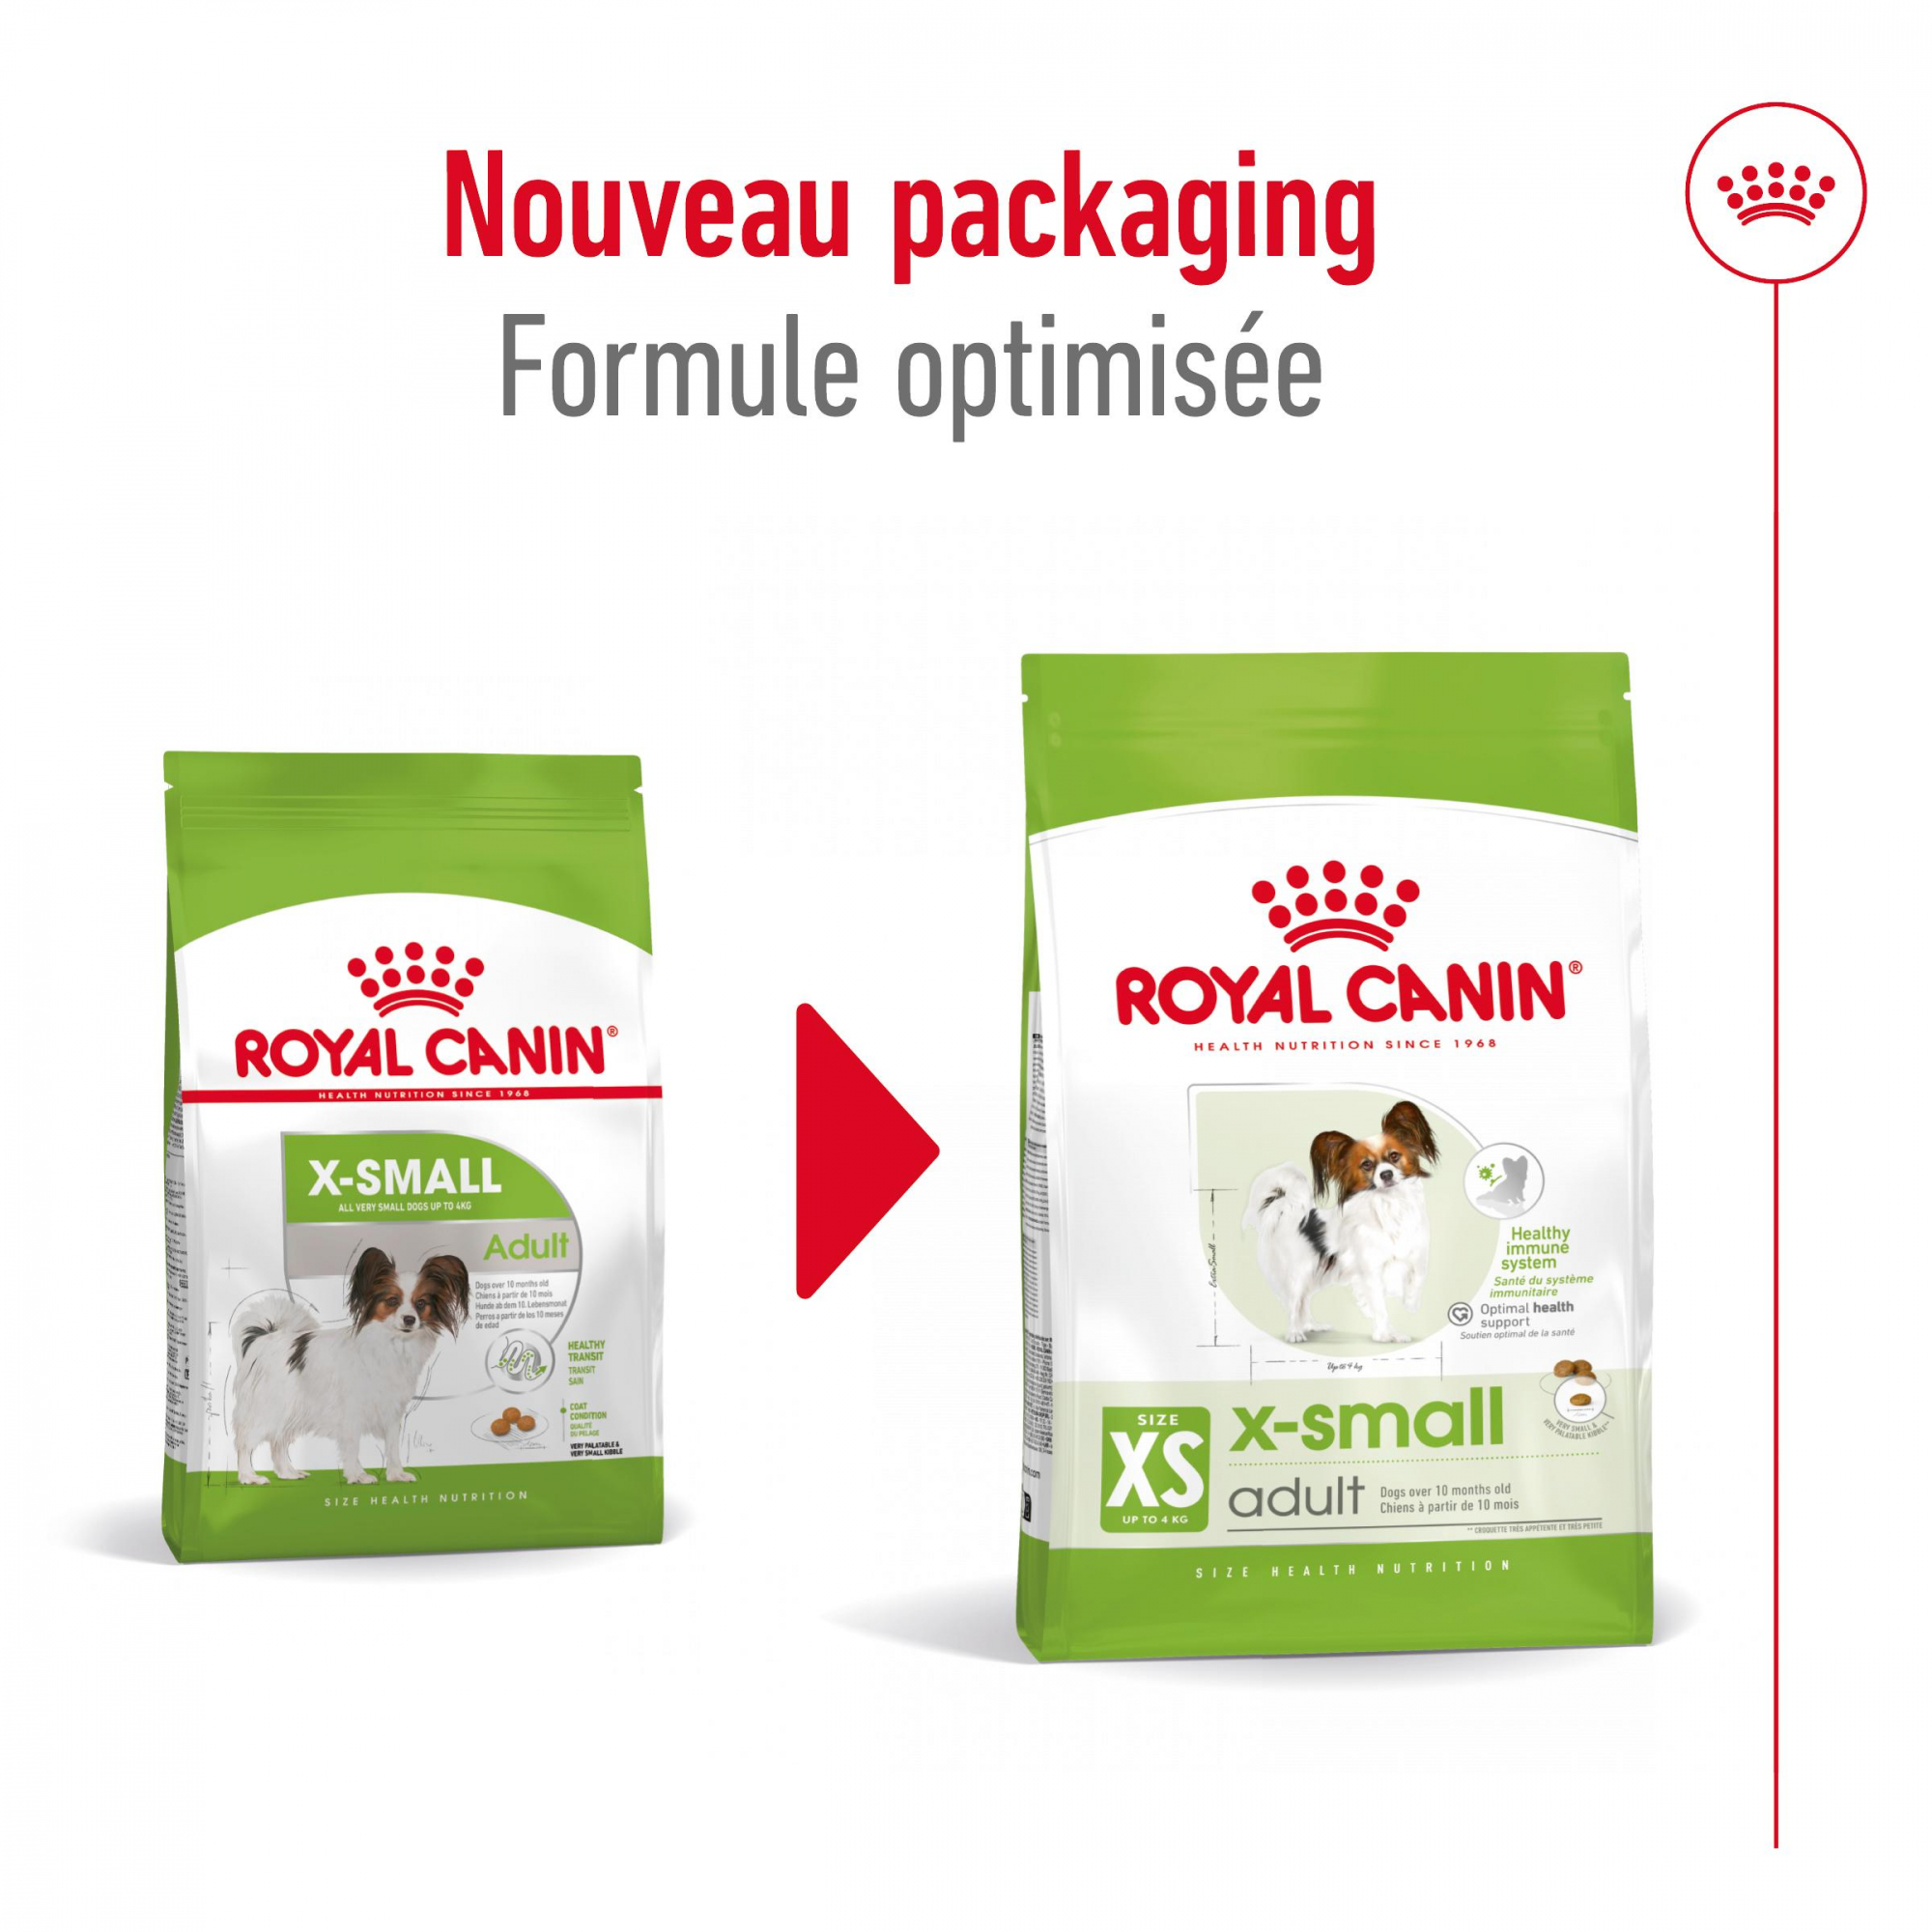 Royal Canin X-Small Adult 